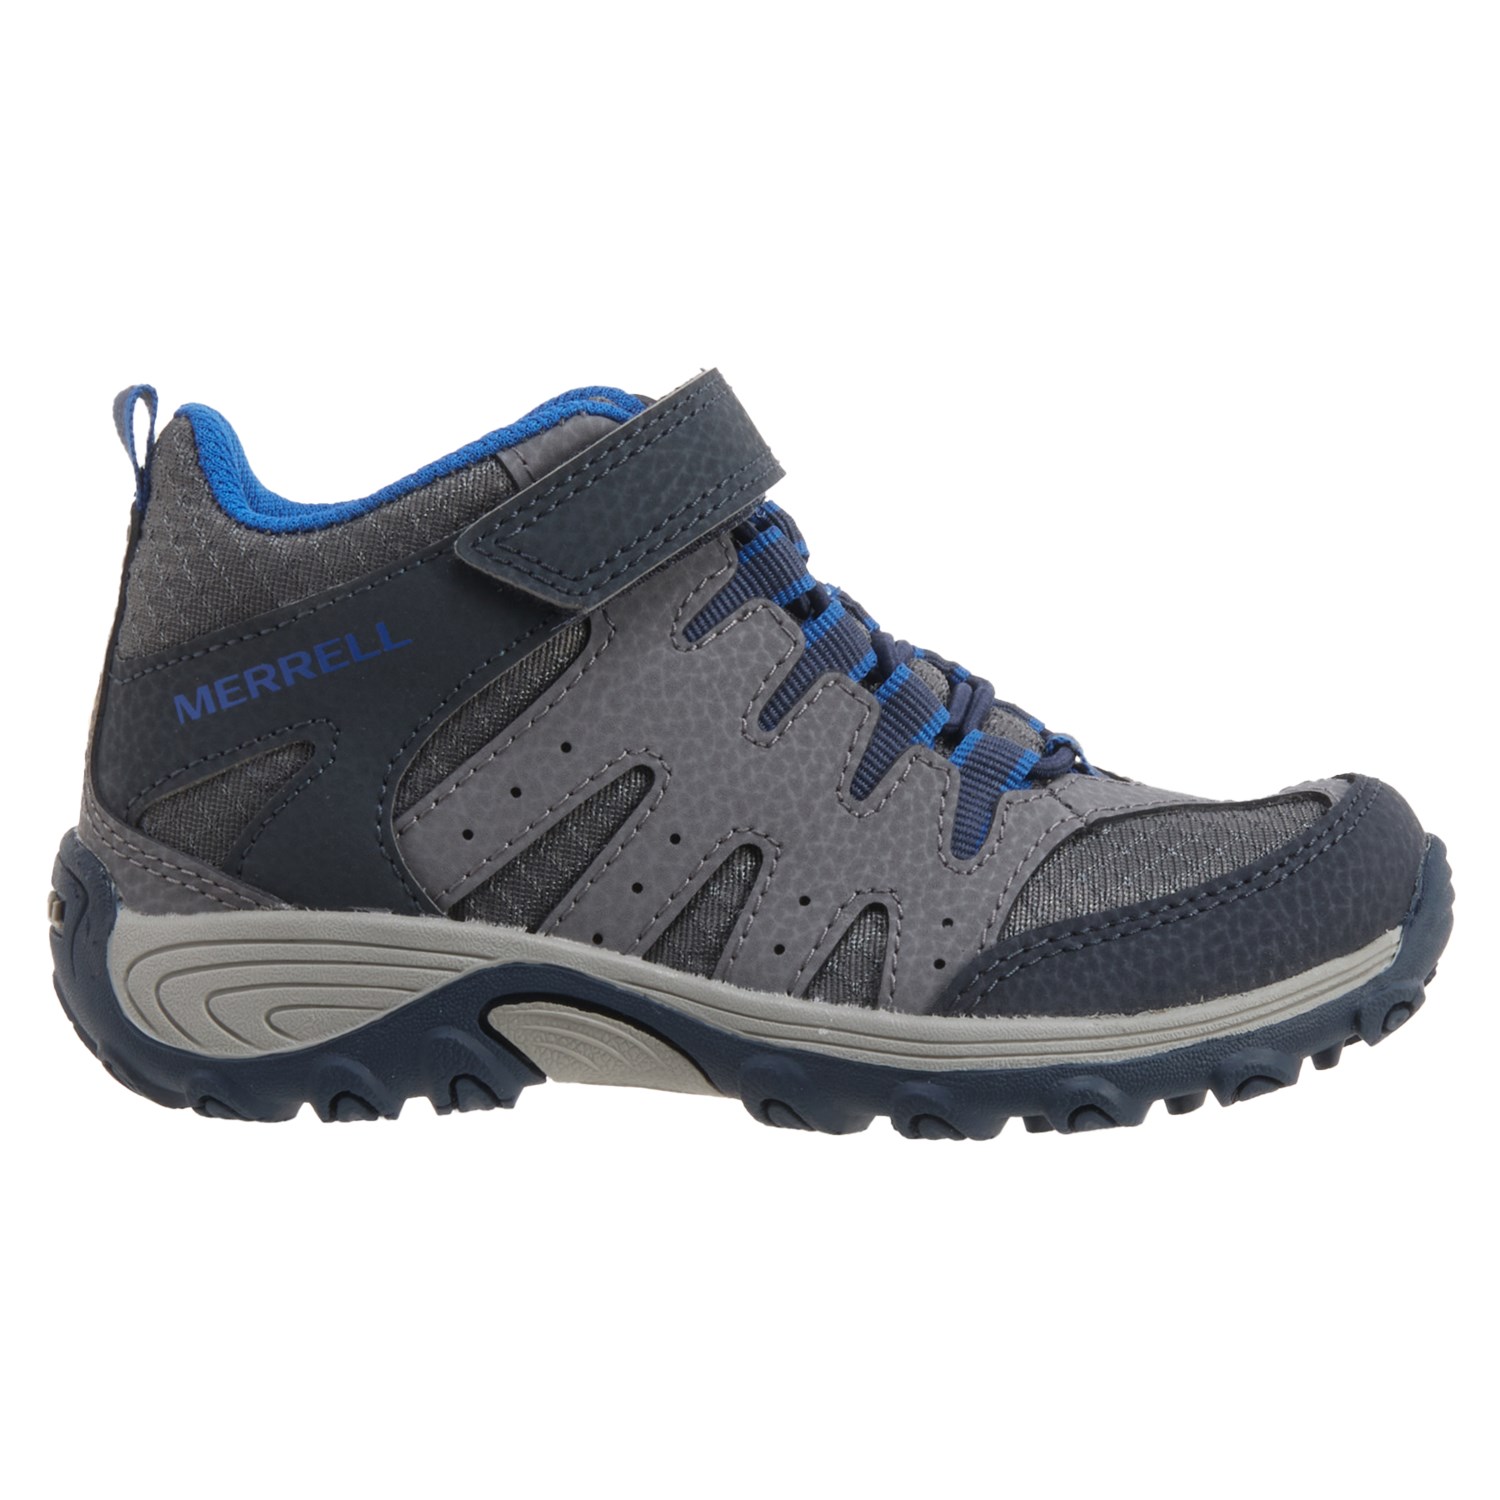 Merrell Boys Outback Mid Hiking Boots - Leather - Save 55%